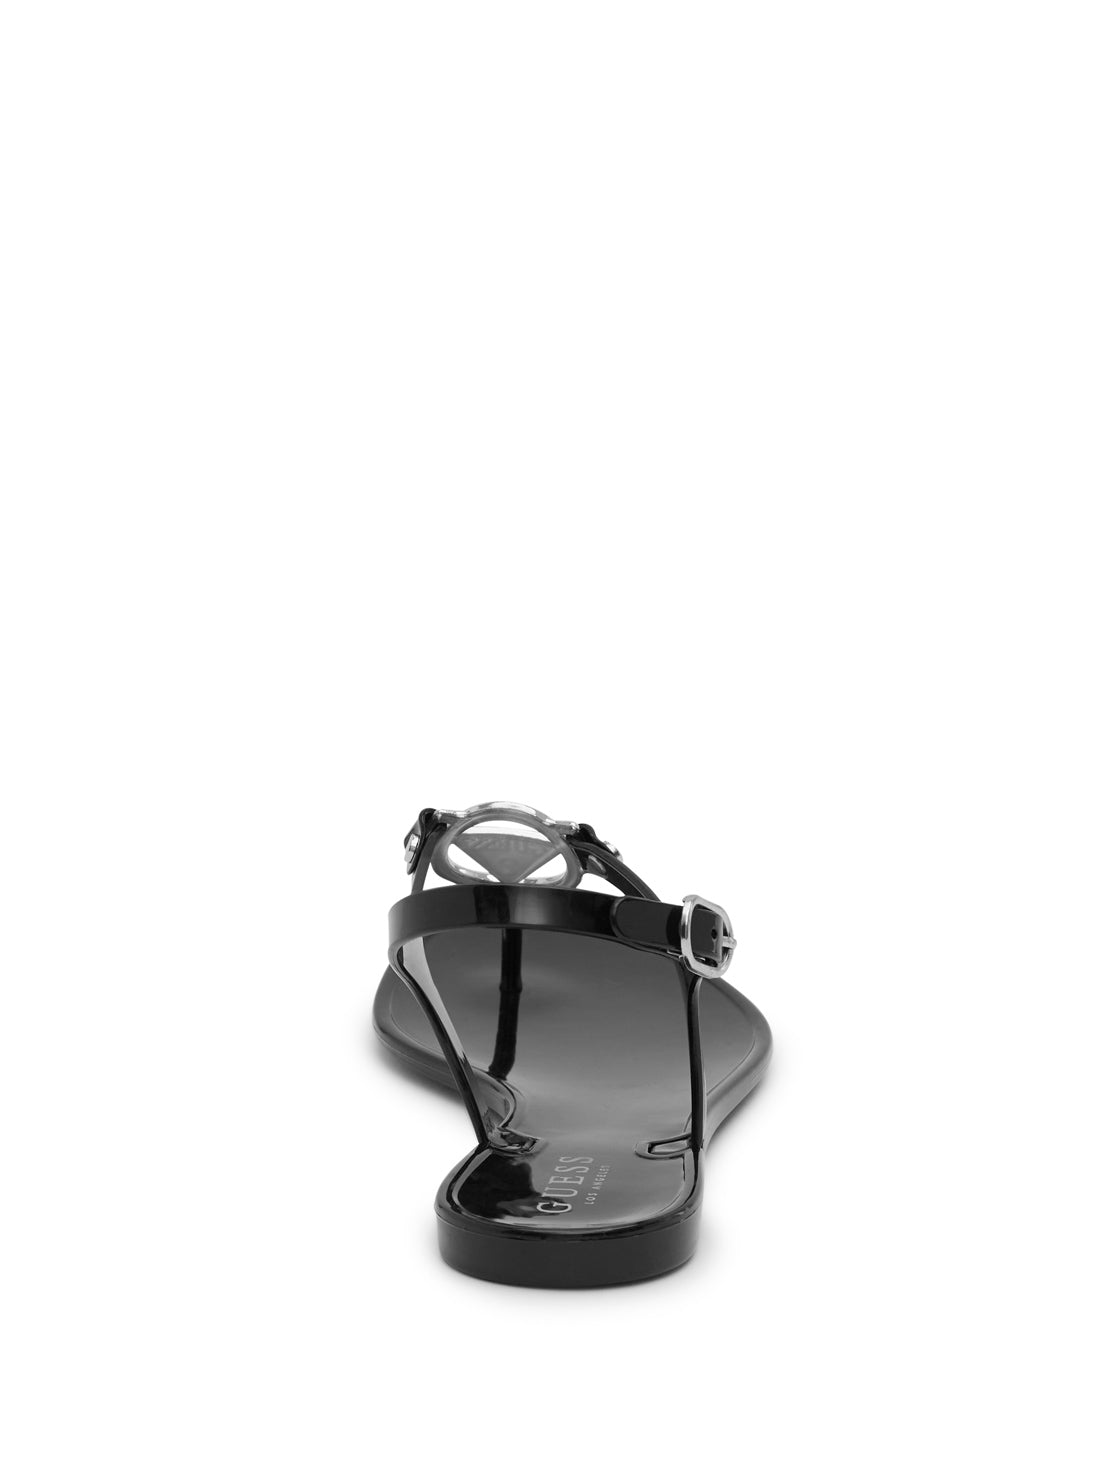 GUESS Women's Black Replace Logo Sandals REPLACE Back View